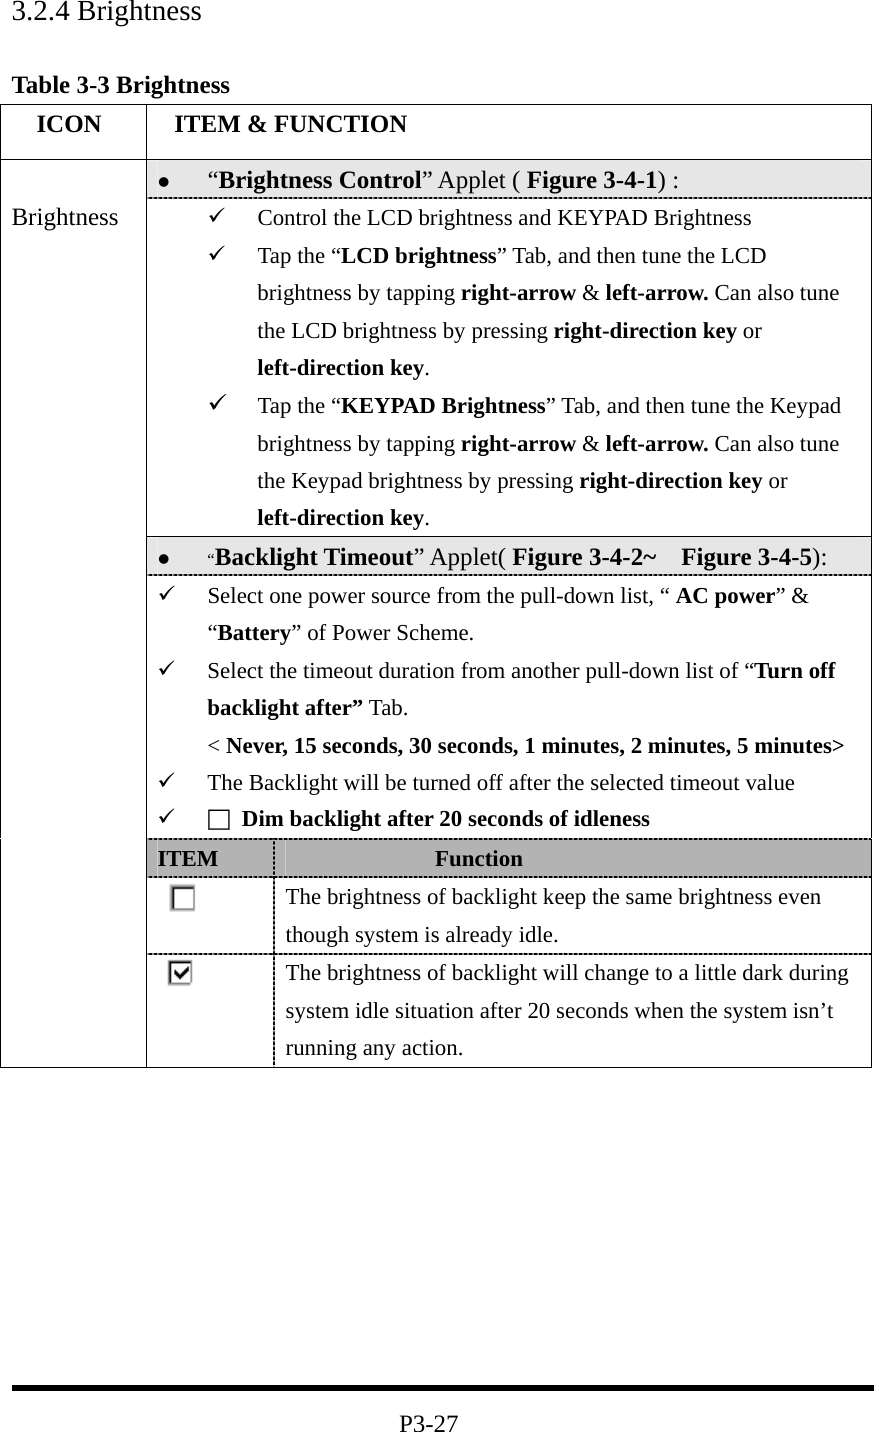 3.2.4 Brightness  Table 3-3 Brightness   ICON   ITEM &amp; FUNCTION   “Brightness Control” Applet ( Figure 3-4-1) :     Control the LCD brightness and KEYPAD Brightness   Tap the “LCD brightness” Tab, and then tune the LCD brightness by tapping right-arrow &amp; left-arrow. Can also tune the LCD brightness by pressing right-direction key or left-direction key.   Tap the “KEYPAD Brightness” Tab, and then tune the Keypad brightness by tapping right-arrow &amp; left-arrow. Can also tune the Keypad brightness by pressing right-direction key or left-direction key.   “Backlight Timeout” Applet( Figure 3-4-2~  Figure 3-4-5):   Select one power source from the pull-down list, “ AC power” &amp; “Battery” of Power Scheme.   Select the timeout duration from another pull-down list of “Turn off backlight after” Tab. &lt; Never, 15 seconds, 30 seconds, 1 minutes, 2 minutes, 5 minutes&gt;   The Backlight will be turned off after the selected timeout value   □  Dim backlight after 20 seconds of idleness ITEM               Function  The brightness of backlight keep the same brightness even though system is already idle.  Brightness  The brightness of backlight will change to a little dark during system idle situation after 20 seconds when the system isn’t running any action.          P3-27 